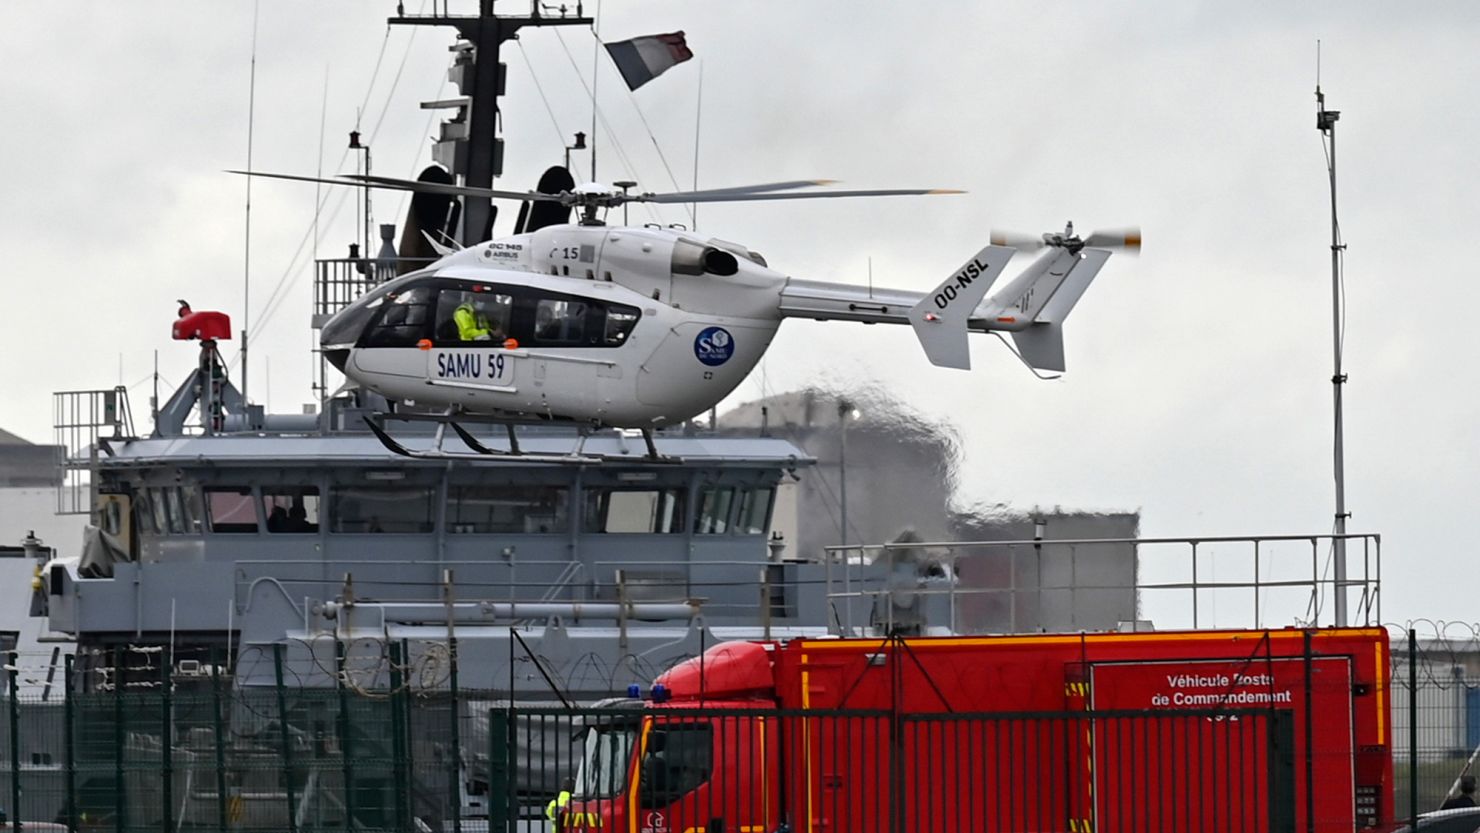 A French rescue helicopter lands close to a rescue vessel in Dunkirk, northern France, on October 27.